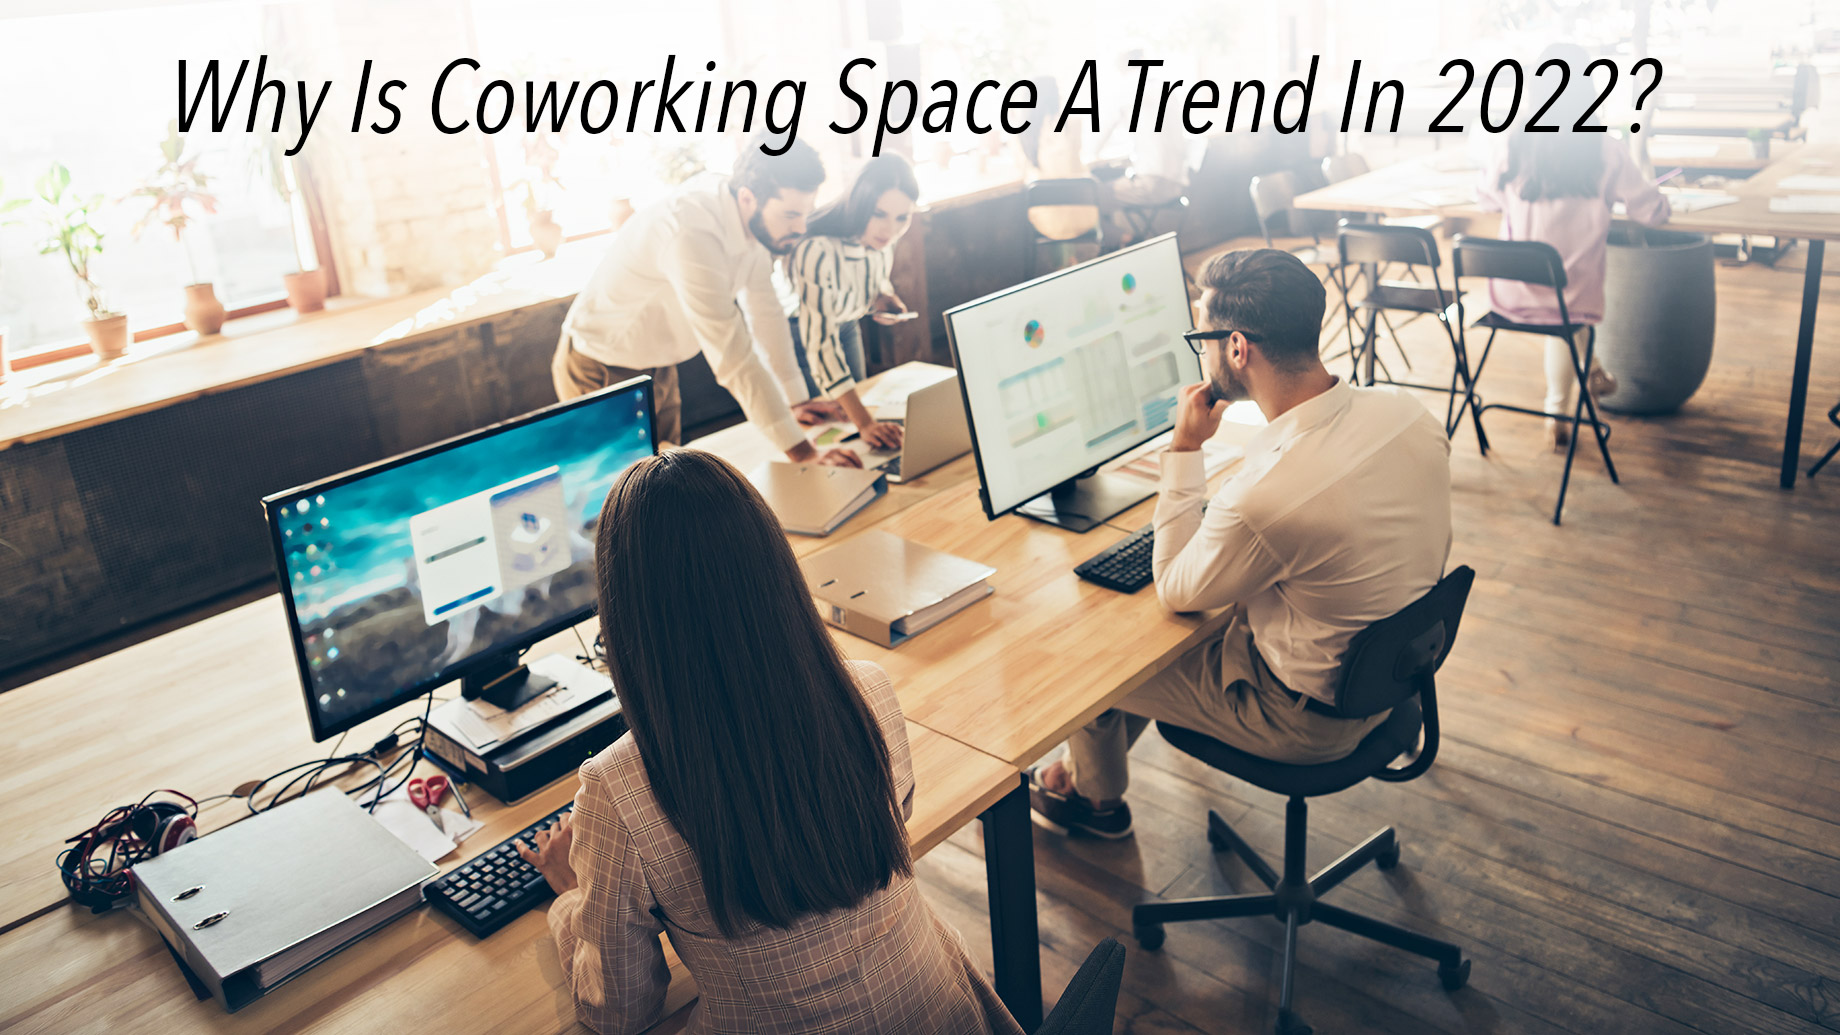 Why Is Coworking Space A Trend In 2022?